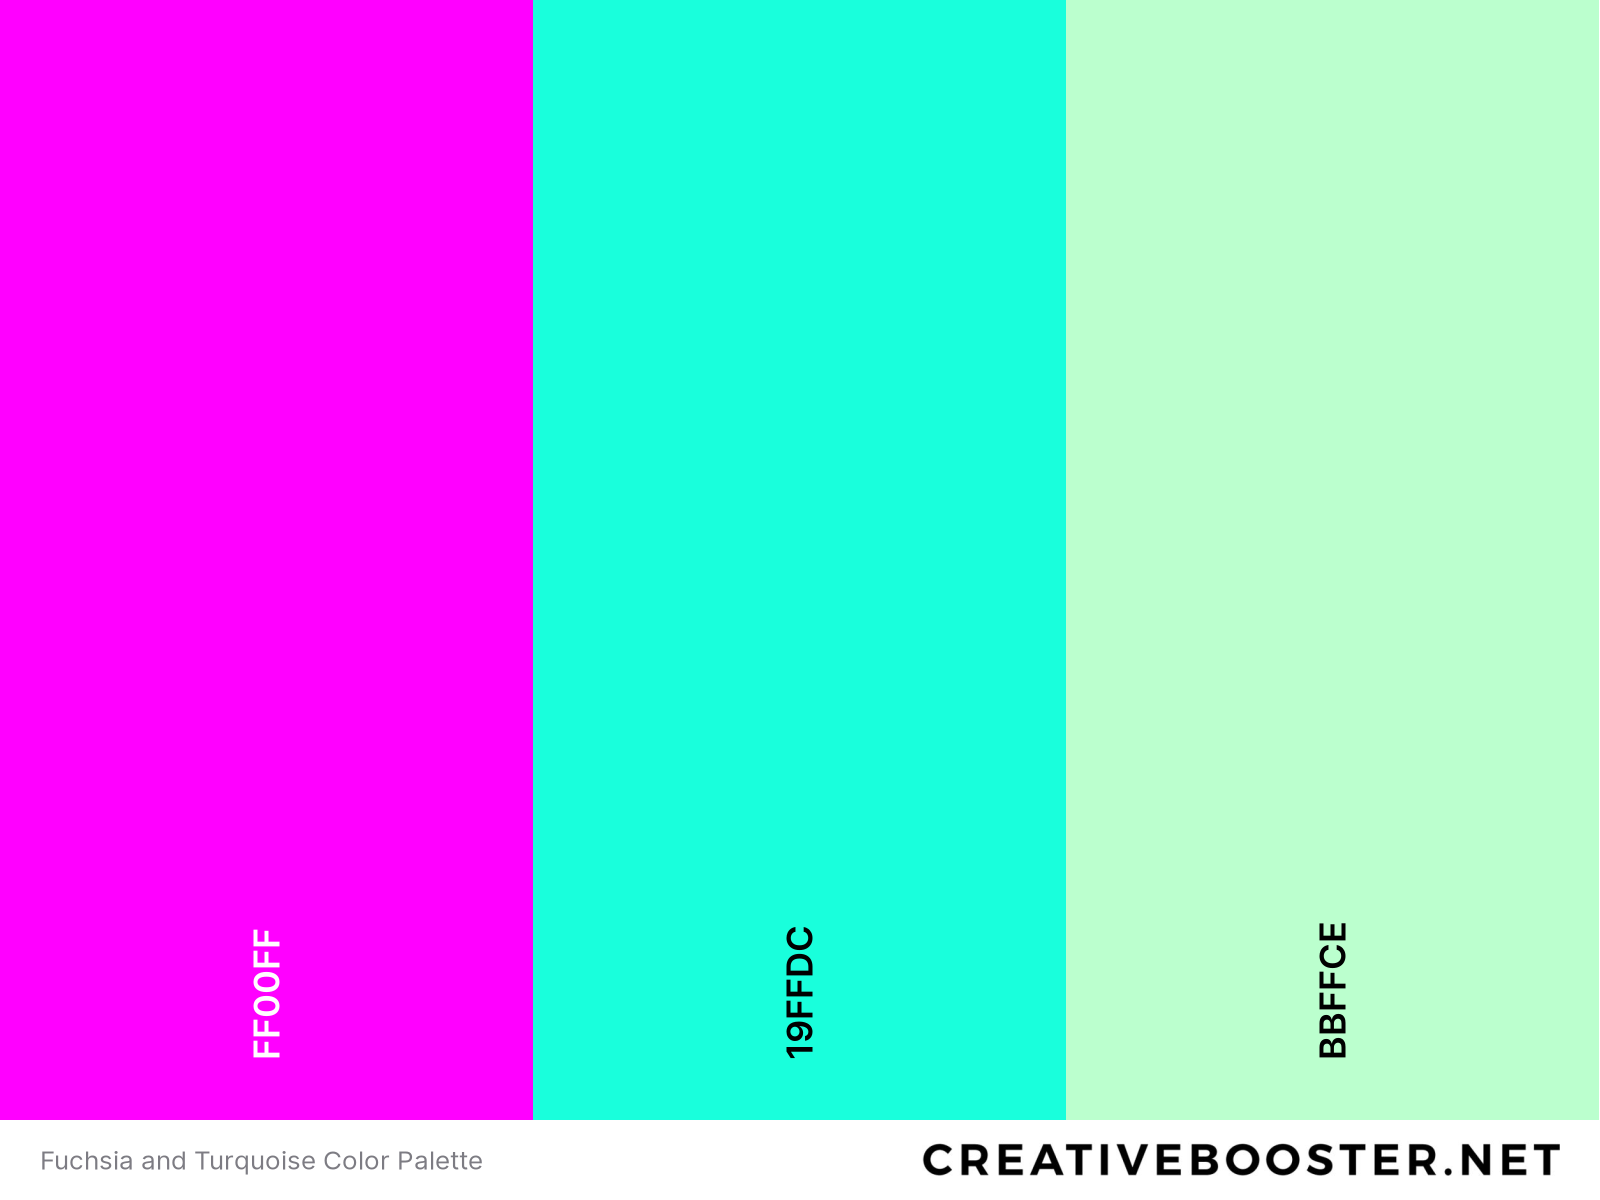 Fuchsia and Turquoise Color Palette